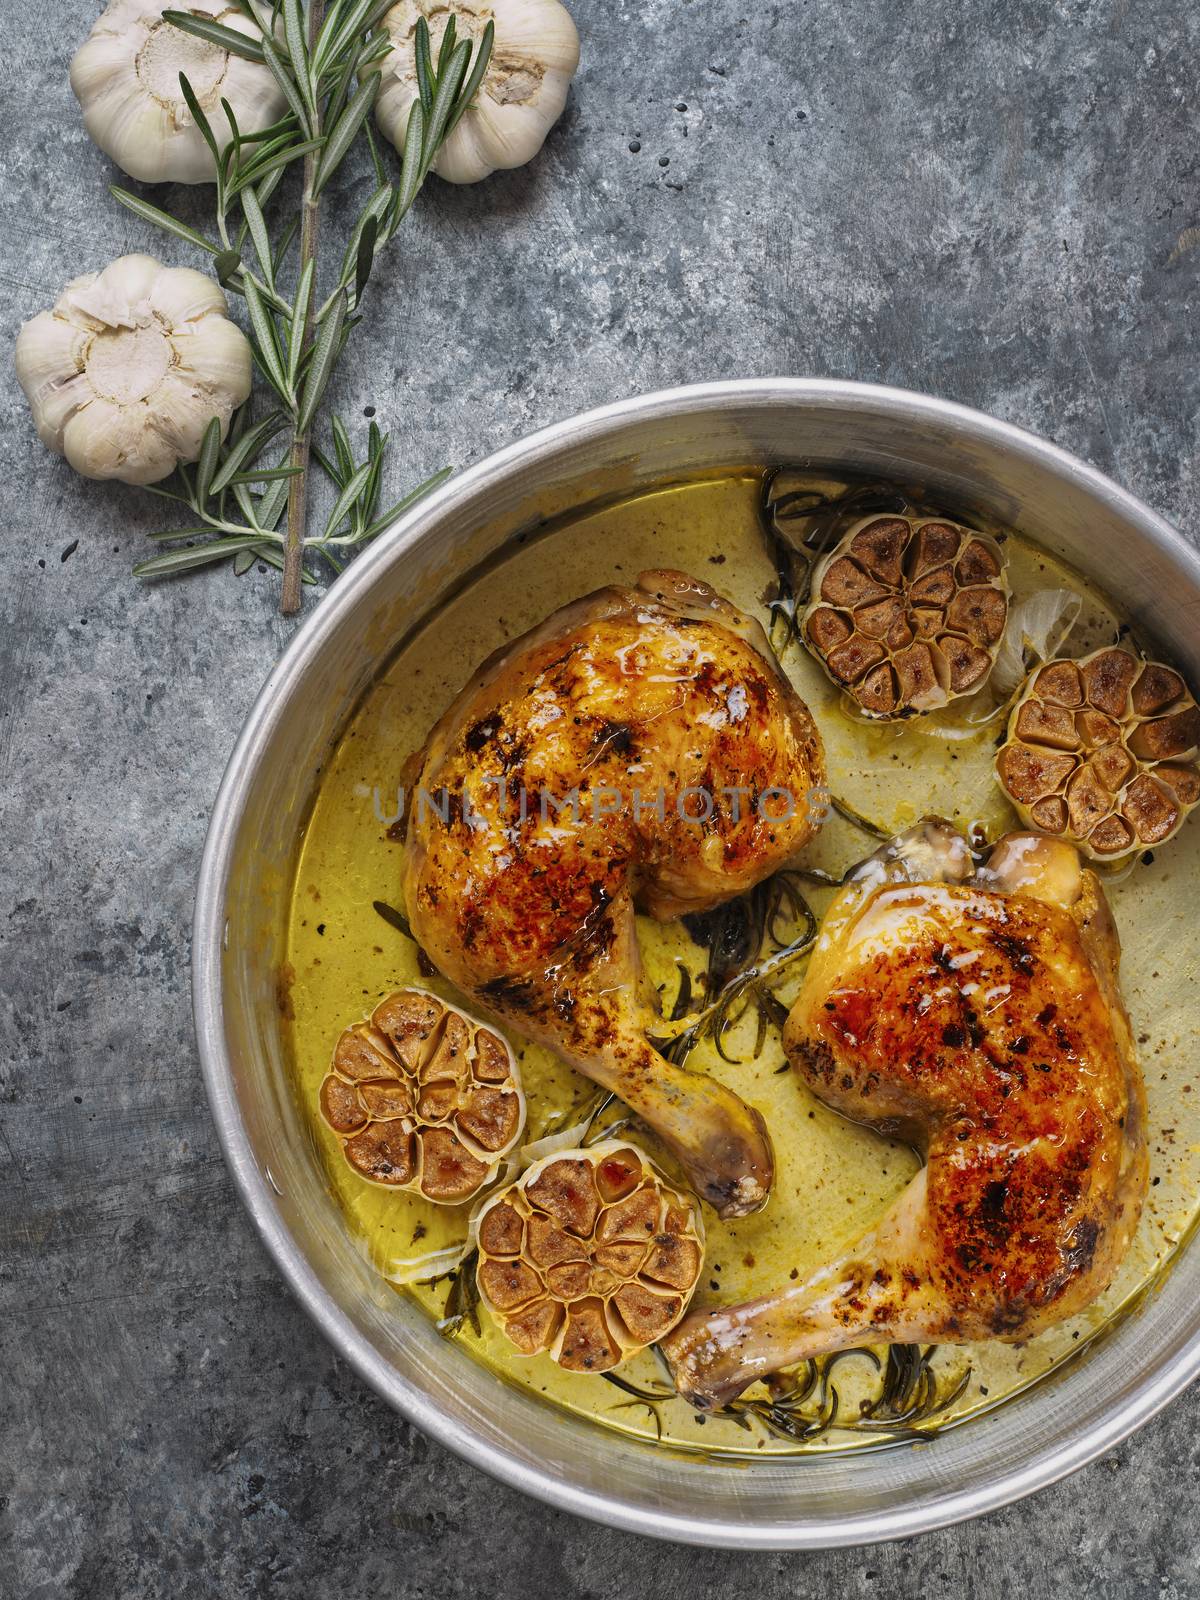 rustic italian roast chicken with garlic and rosemary by zkruger